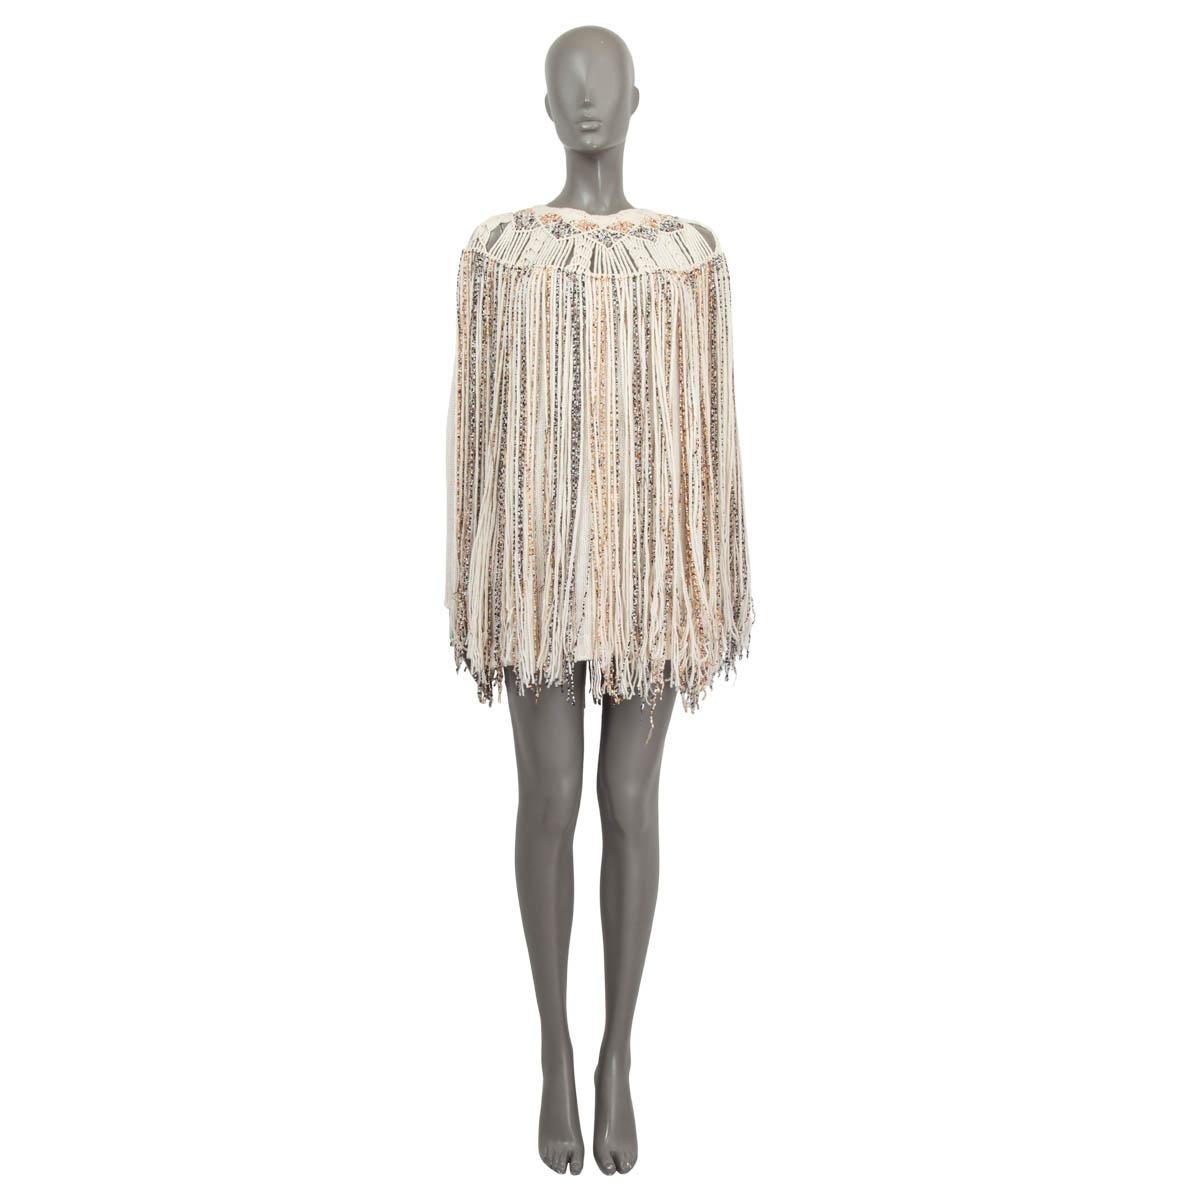 100% authentic Christian Dior knit dress in ivory cashmere (100%) with fringed details in copper, black, orange, yellow and gold cashmere (81%), polyamide (11%), viscose (5%) and cotton (3%). Opens with one button on the back neck. Unlined. Has been